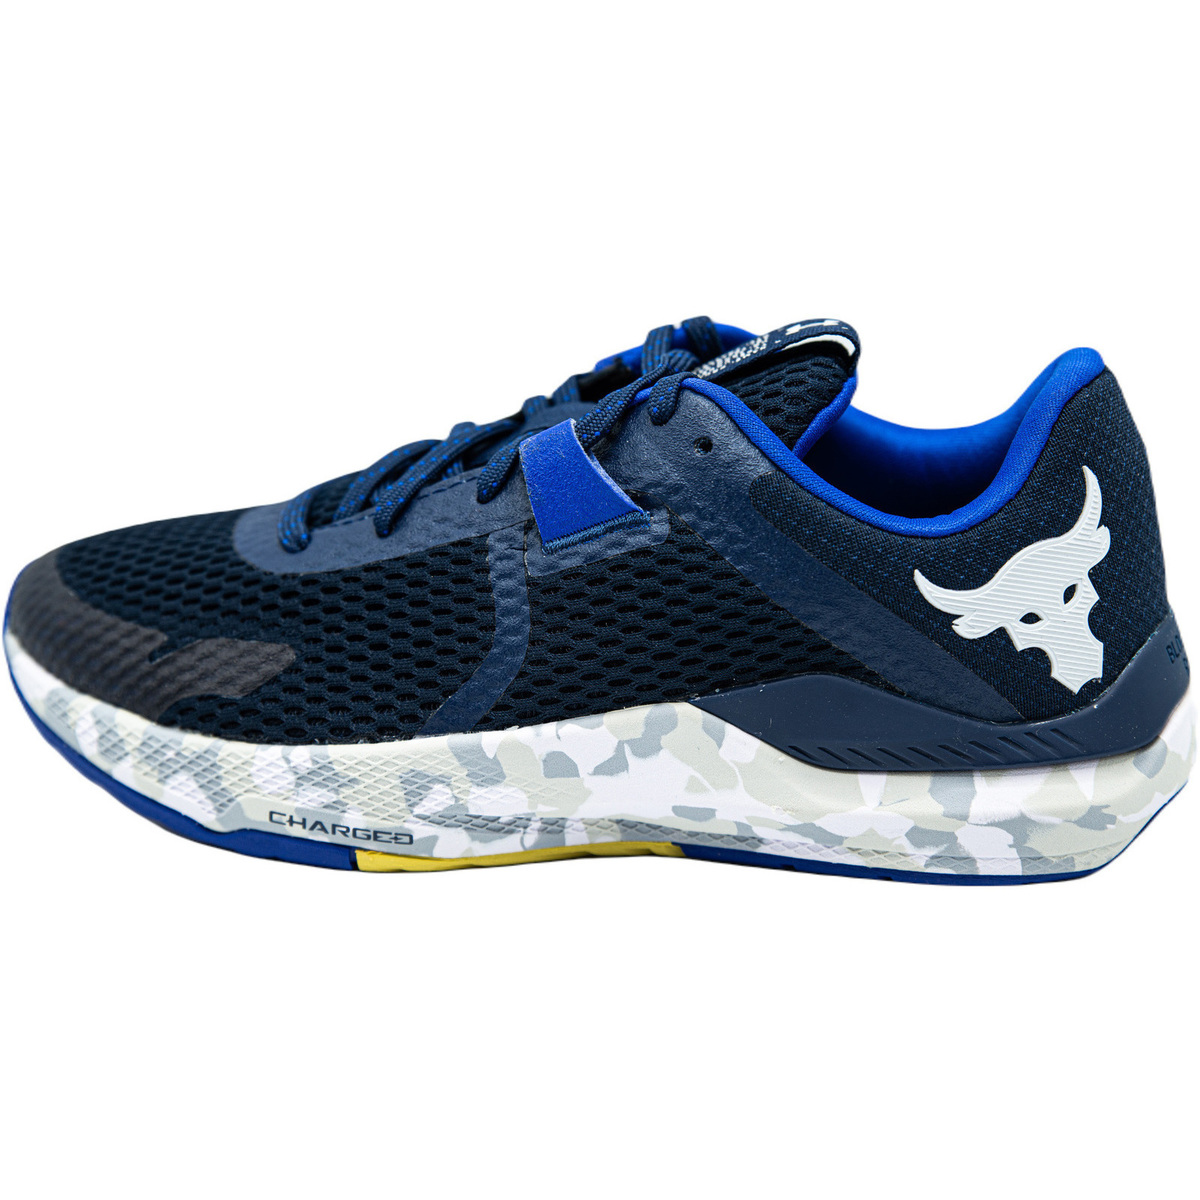 Tennarit Under Armour Project Rock BSR 2 40 1/2